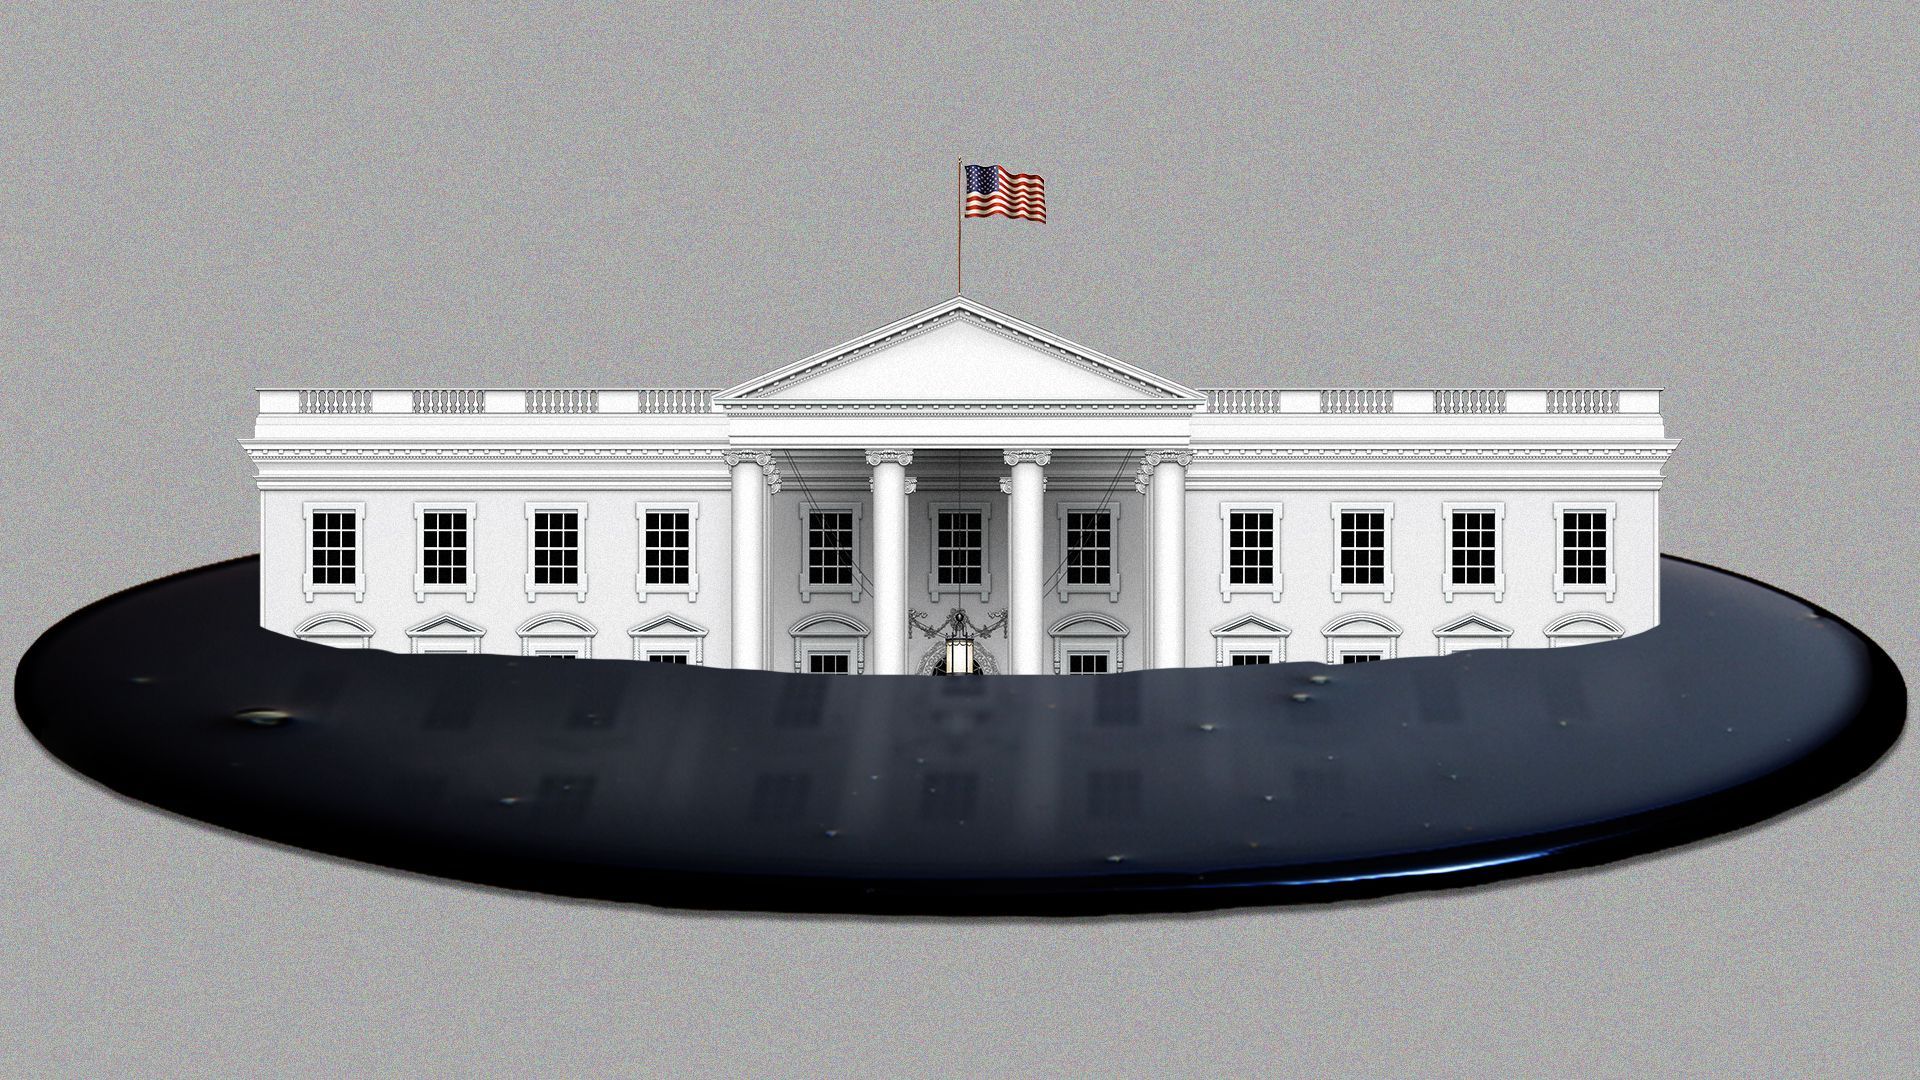 Illustration of the White House sinking into a puddle of oil.